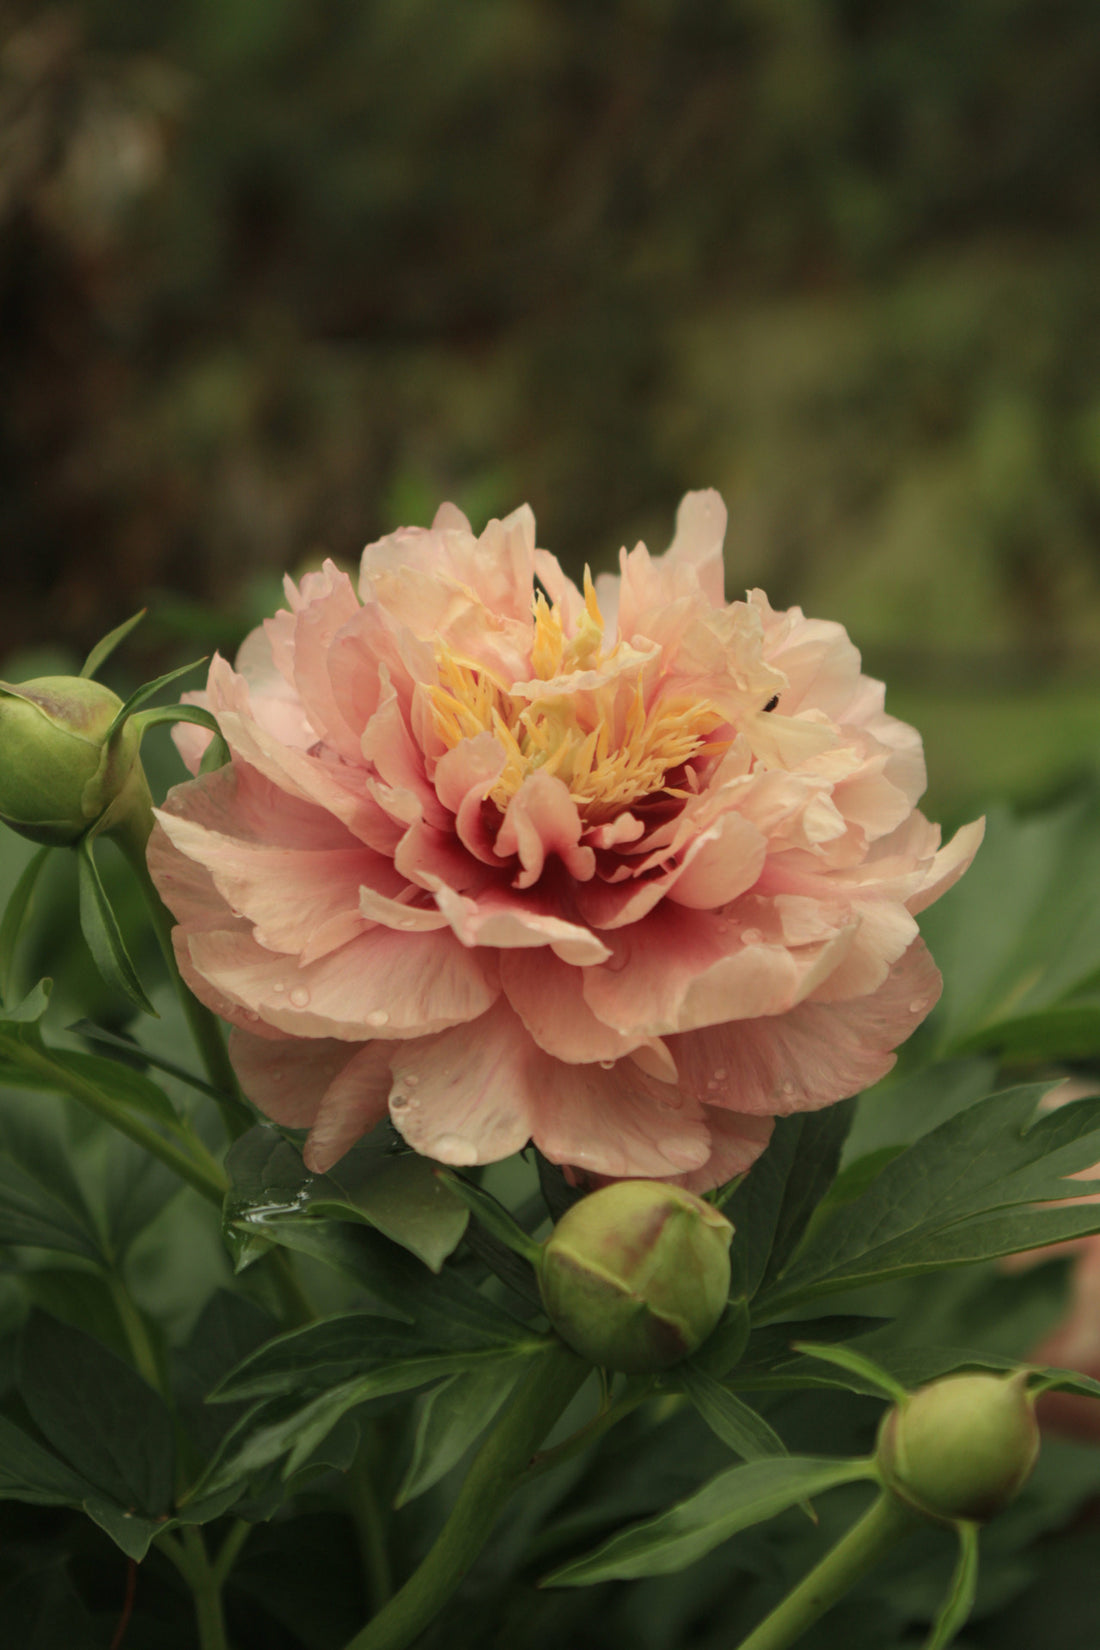 Explore the Beauty of Intersectional Peonies